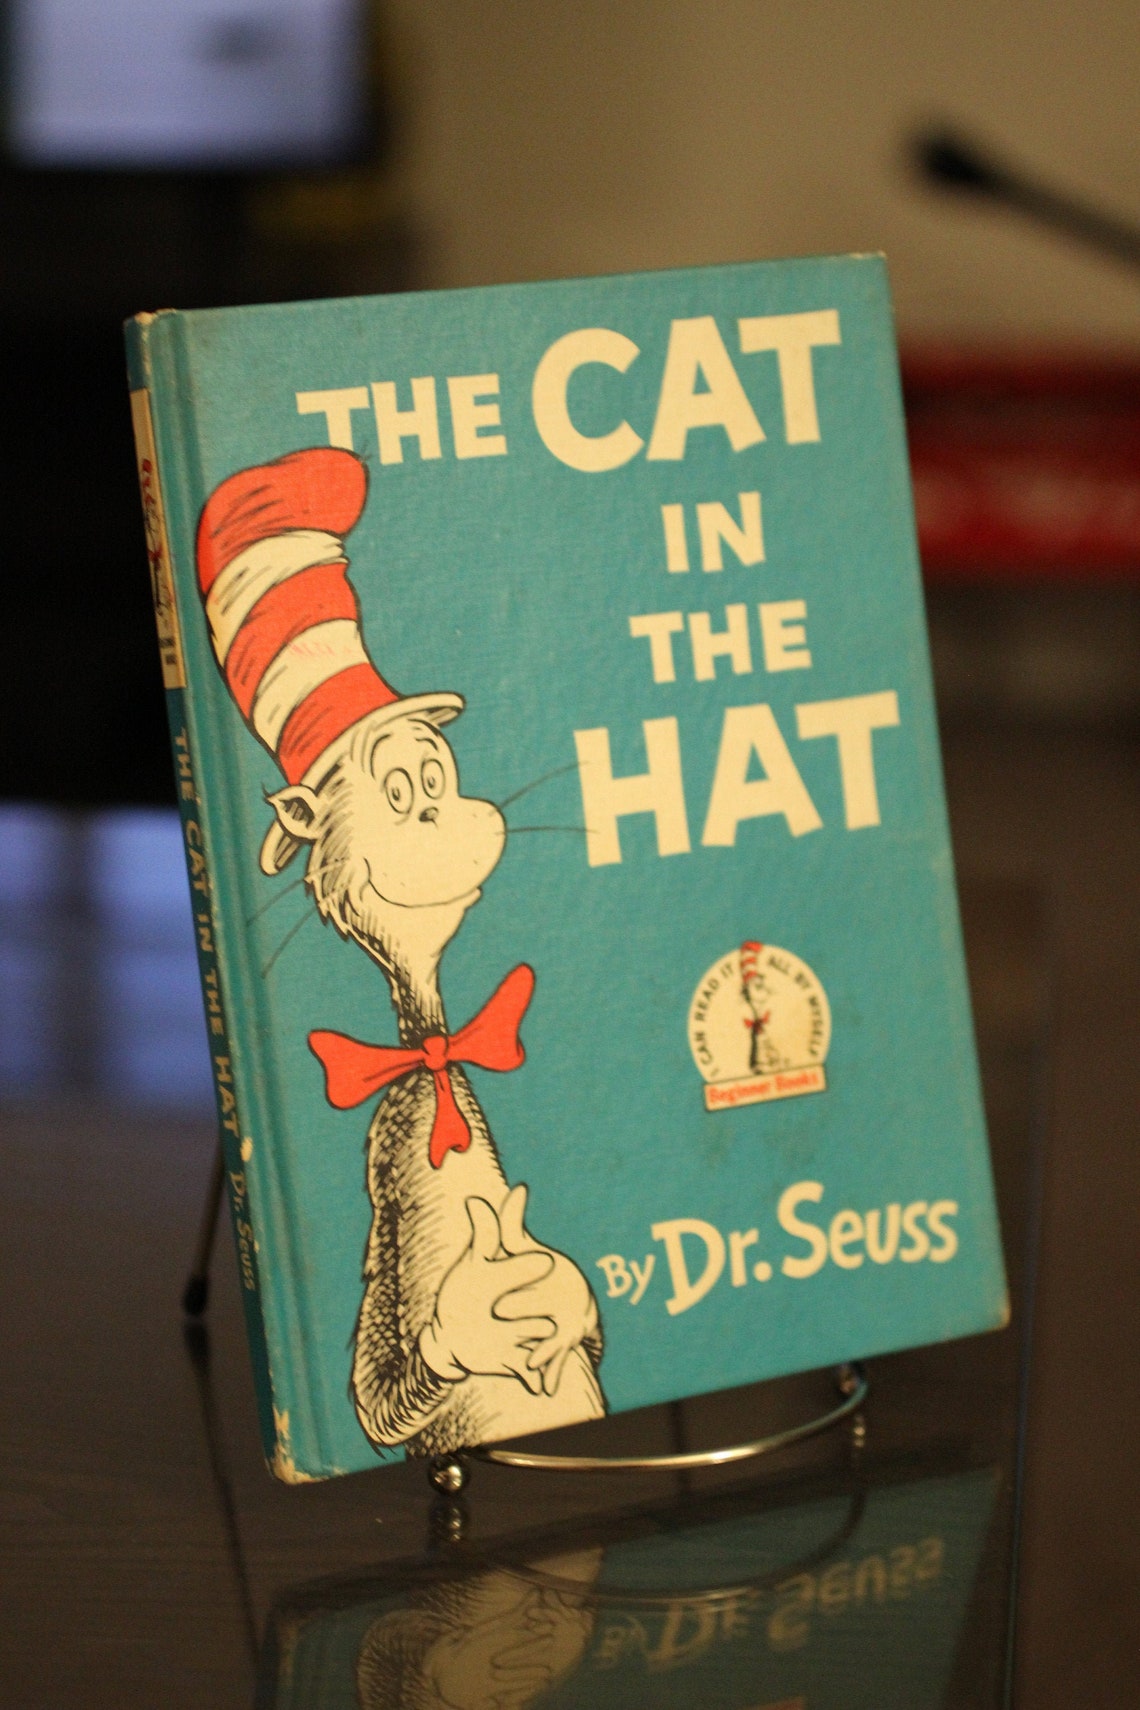 1957 The Cat in the Hat by Dr. Seuss Beginner Books Series | Etsy